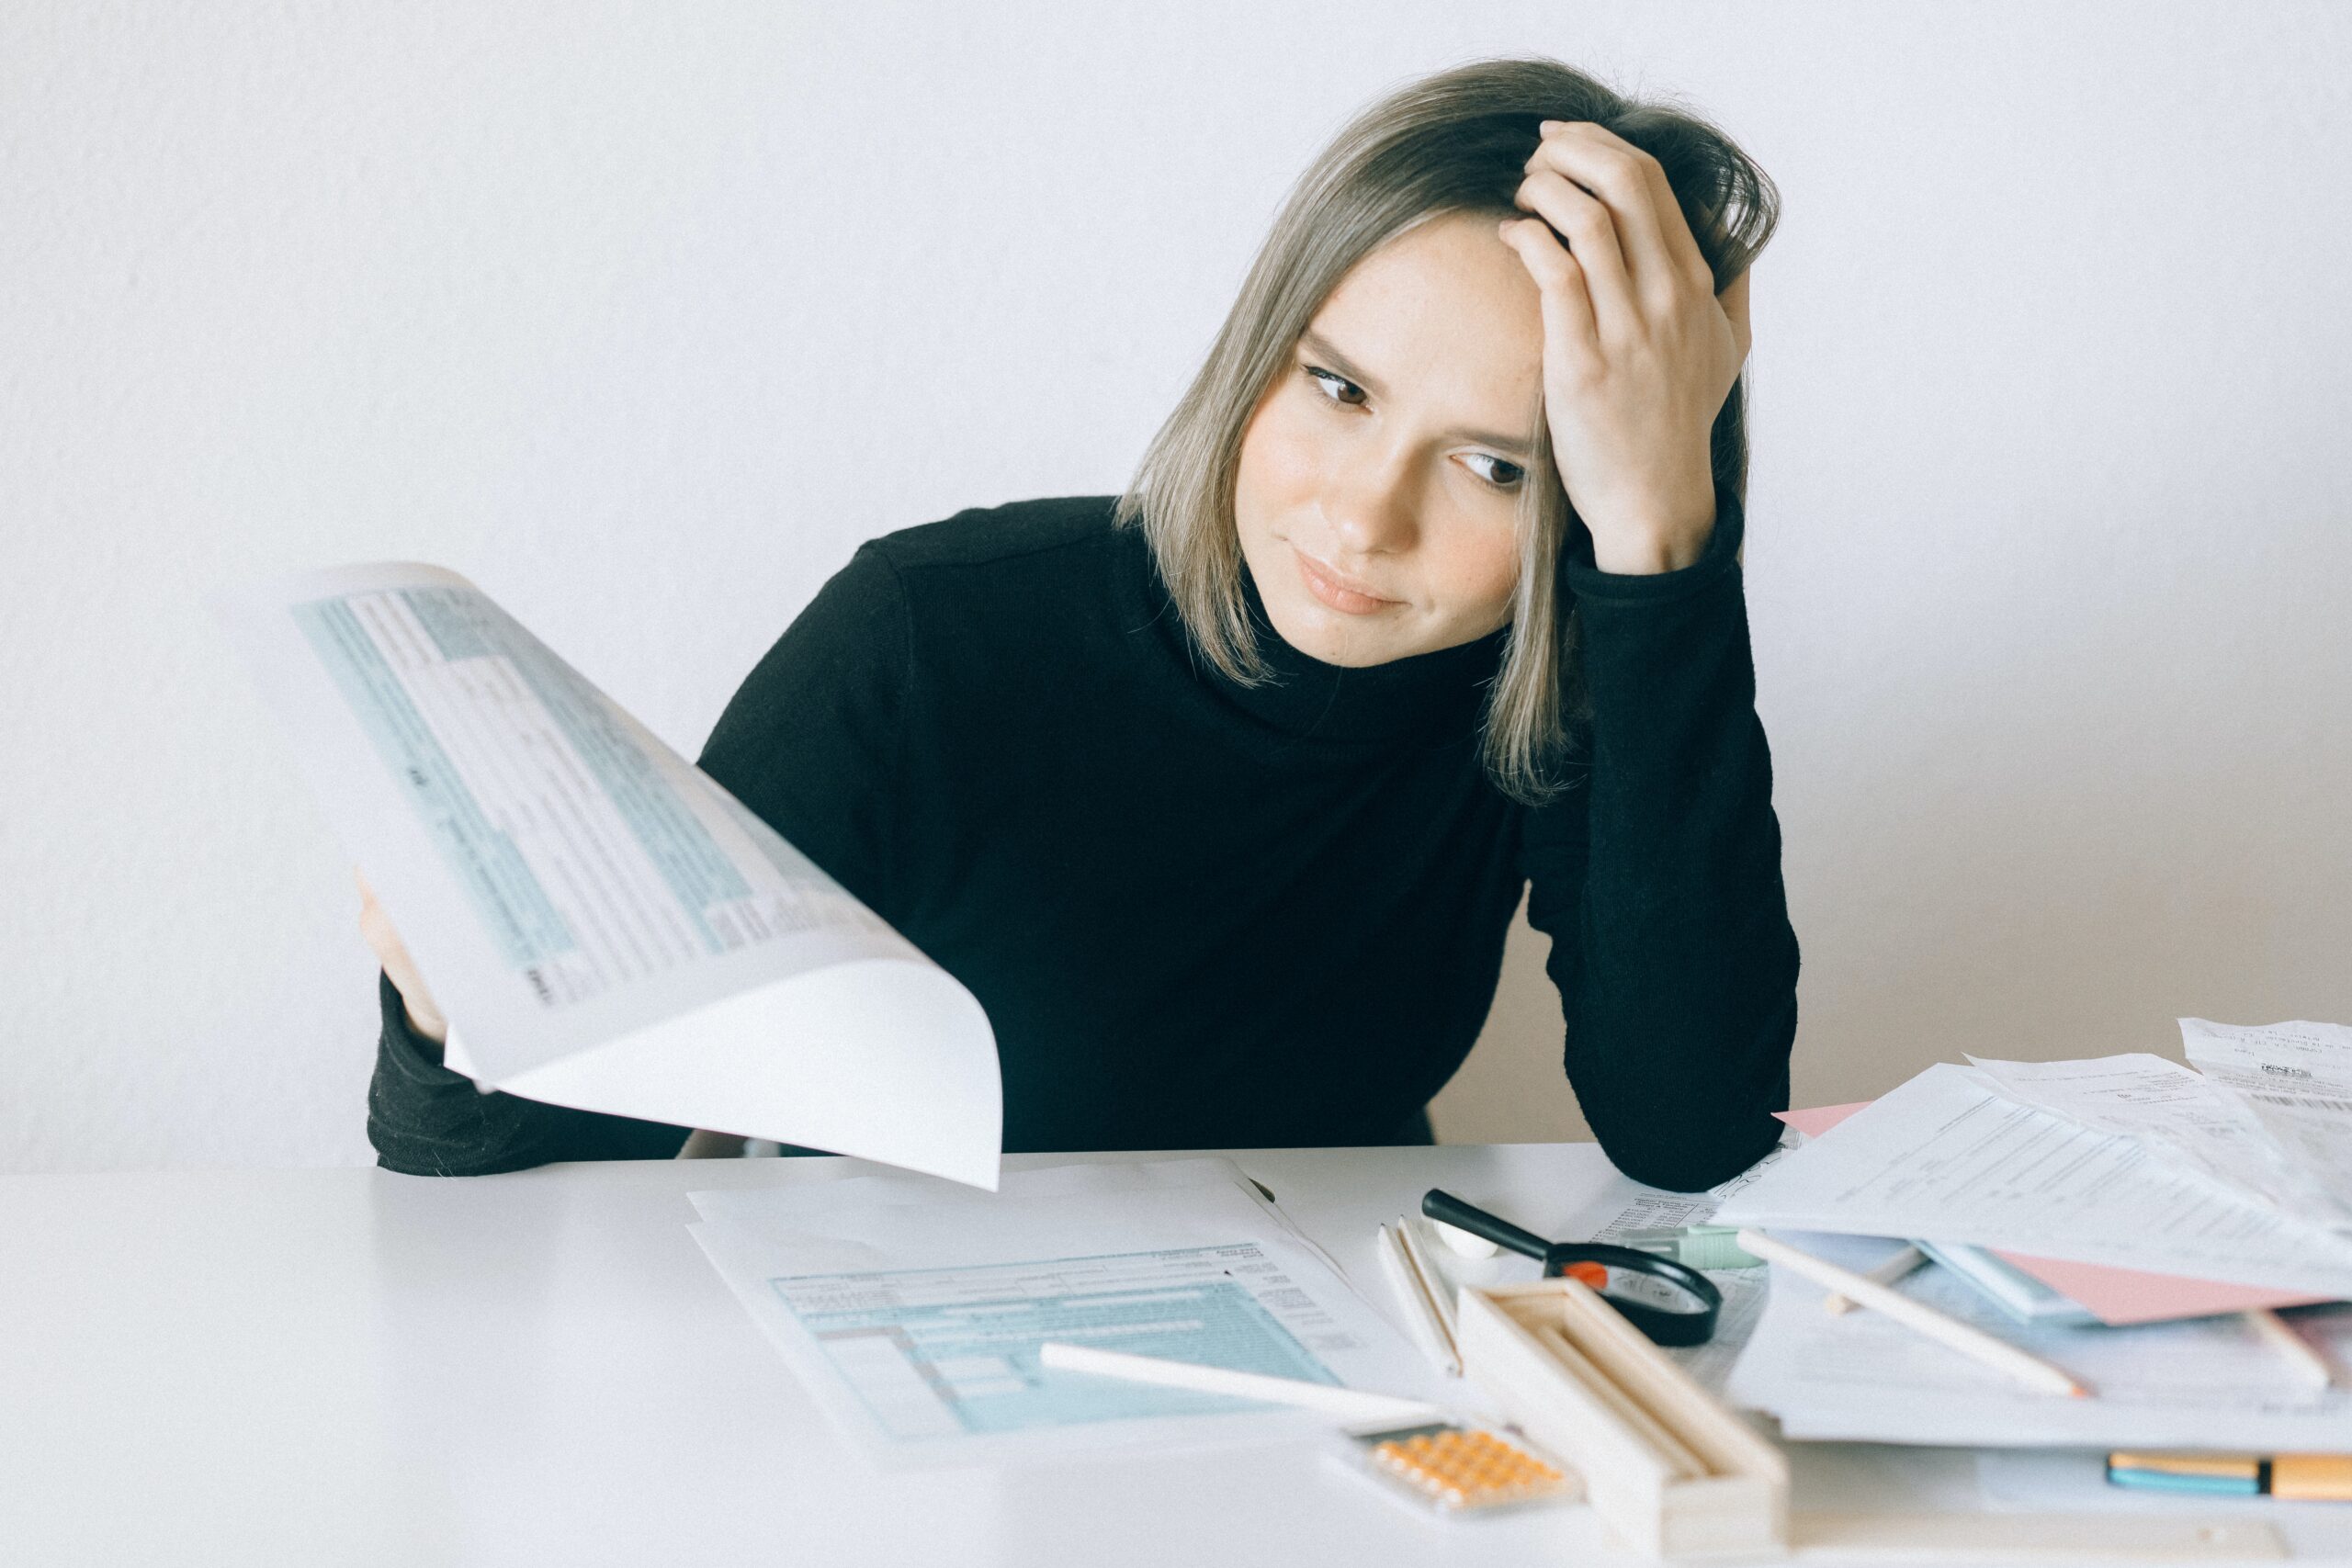 money quiz income tax - woman with shoulder length hair wearing black, staring at tax forms with her head in her hand.